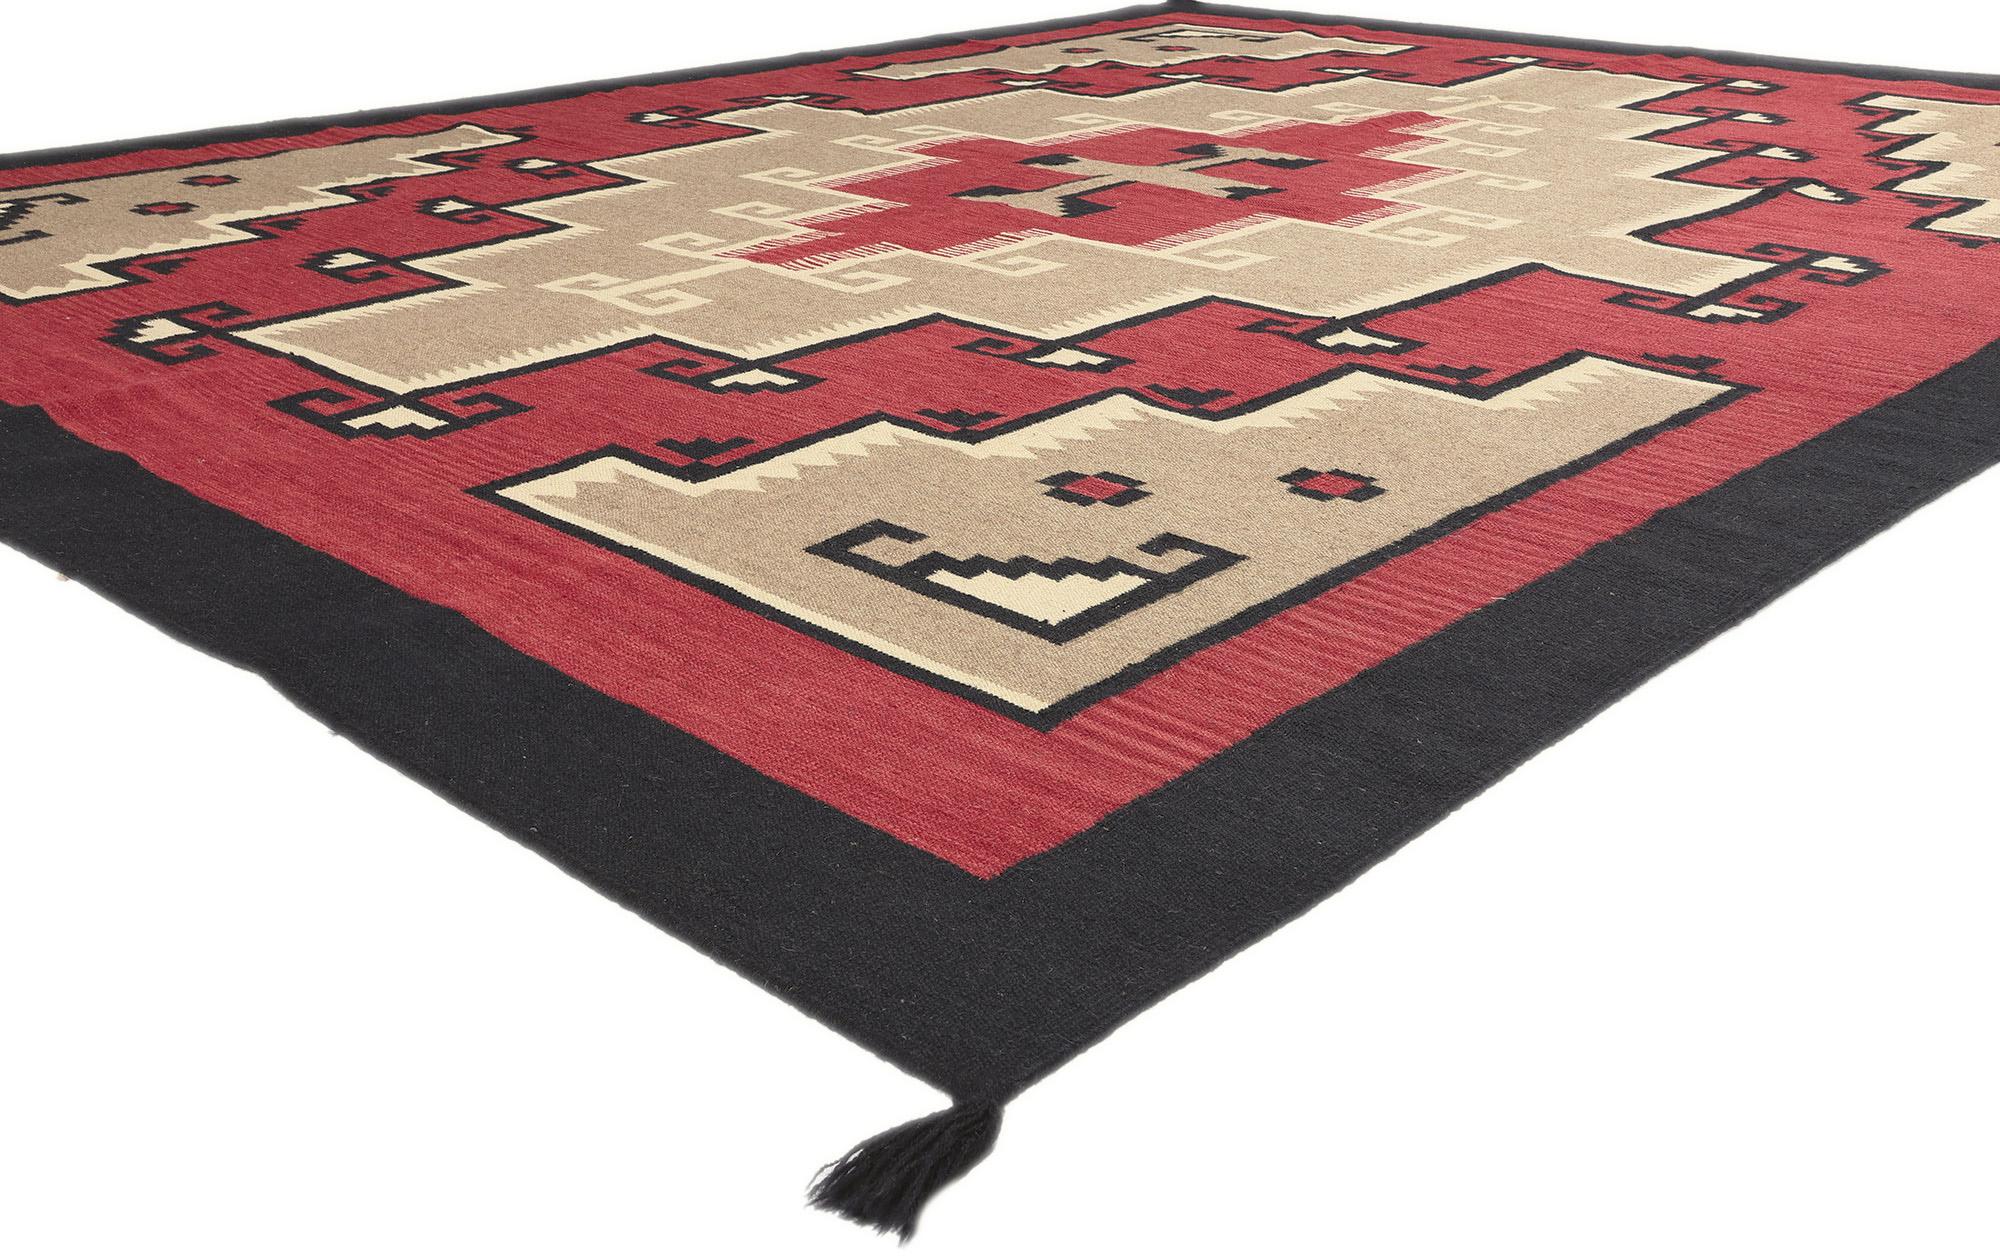 81025 Modern Southwest Red Ganado Navajo-Style Rug, 09'01 x 11'09. Embark on a captivating journey of contemporary elegance as you explore the artistry woven into this meticulously crafted Ganado Navajo-style rug. This enchanting piece beckons you